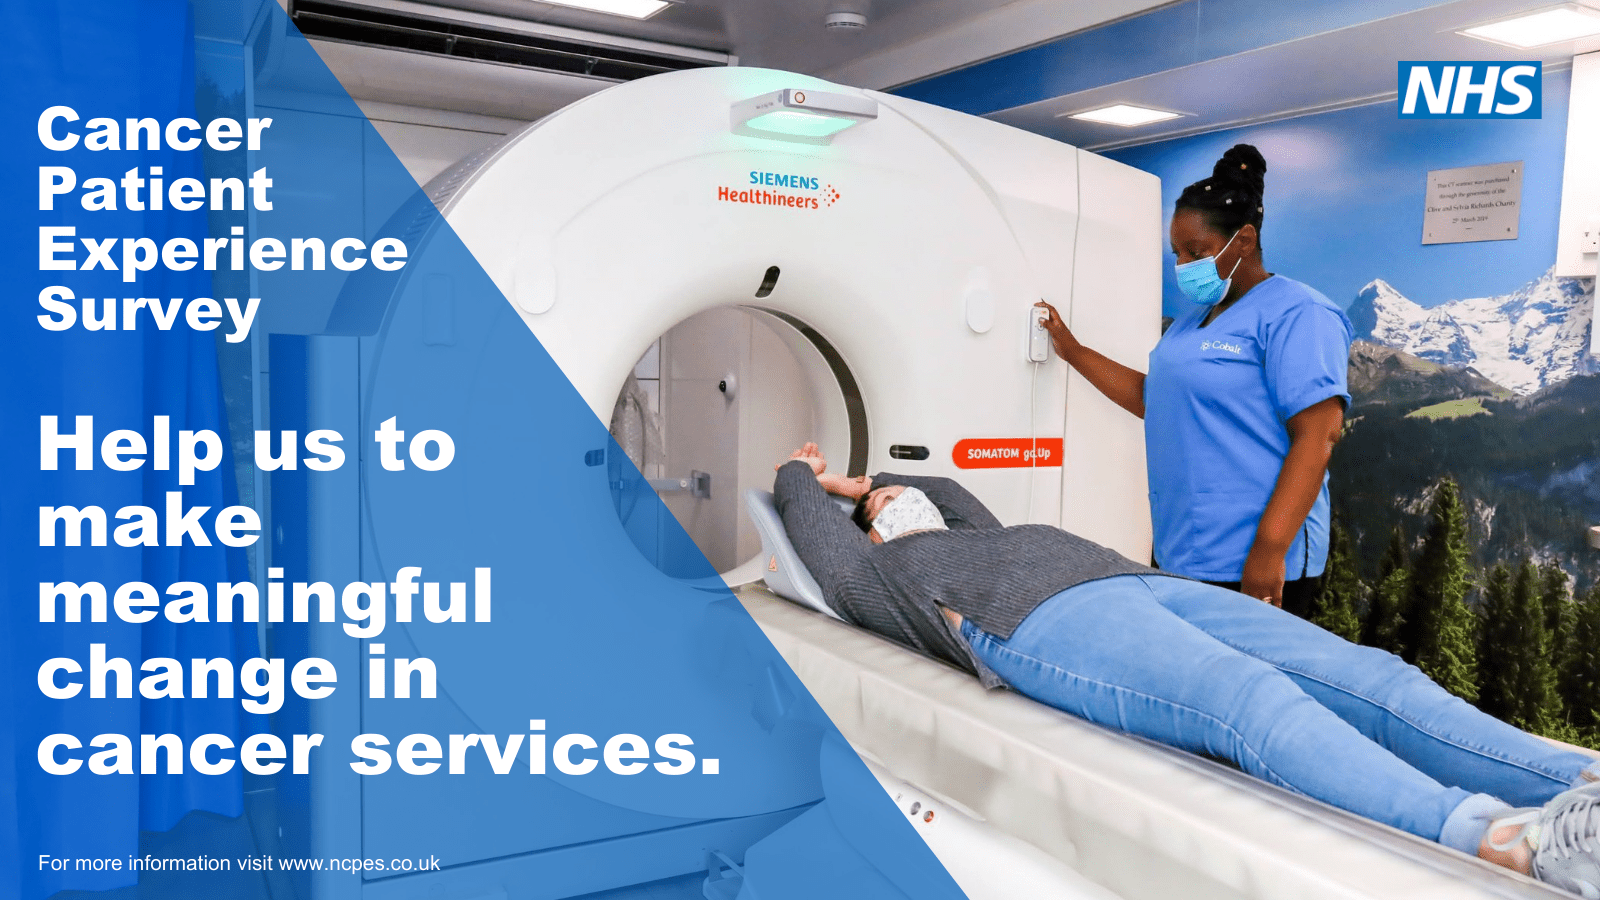 Graphic to advertise the national Cancer Patient Experience Survey (CPES). It shows a person entering a CT scanner while a nurse in scrubs stands to their left and operates the machine. The words 'Help us to make meaningful changes in cancer services.'